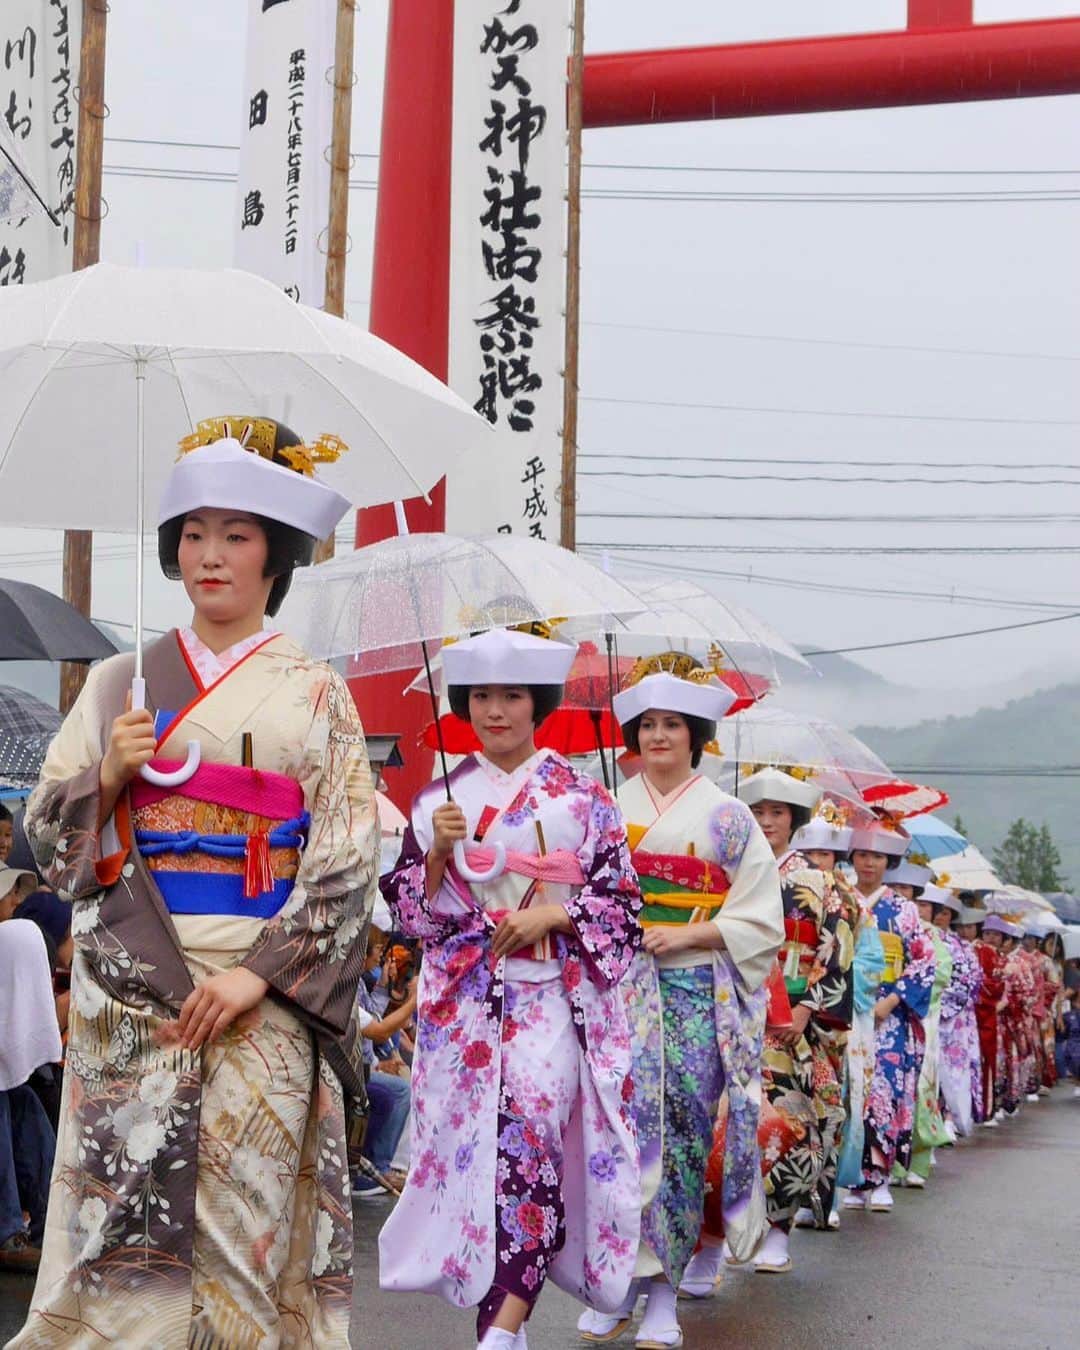 Rediscover Fukushimaのインスタグラム：「Read our latest blog post to find out the 2023 dates, times & access information for some of Fukushima’s summer festivals (link in stories)! 👘💕🐎  Firework displays, people dressed in yukatas, and delicious street food are some of the typical elements of ‘natsu matsuri’, Japanese summer festivals. 🎇🥰🍱  During the warmer months of the year, Fukushima prefecture hosts a wide range of events to enjoy.  These are some summer festivals to look forward to in 2023 (please note that events are subject to change/cancellation):  Picture 1 ⭐Aizu-Tajima Gion Festival (Minamiaizu) 📍A short walk away from Aizu-Tajima Station 🗓️ July 22 (Sat,), 23 (Sun.), 24 (Mon.), 2023  Picture 2 ⭐Soma Nomaoi Festival (Minamisoma City) 📍Different locations in Minamisoma City 🗓️ July 29 (Sat.), 30 (Sun.) and 31 (Mon.), 2023  Picture 3 ⭐Fukushima Waraji Festival (Fukushima City) 📍5 min walk from JR Fukushima Station 🗓️ August 4 (Fri.), 5 (Sat.) and 6 (Sun.), 2023  Picture 4 ⭐Sukagawa Shakadogawa River Fireworks Festival (Sukagawa City) 📍5 min walk from JR Sukagawa Station 🗓️ August 26 (Sat.), 2023  Read our blog post for more events + details!  Which festival are you looking forward to the most? Please let us know in the comments, and don’t forget to save this post for future reference! 🤩🔖  #fukushima #japan #visitfukushima #visitjapan #explorejapan #photooftheday #travelgram #traveling #tourism #matsuri #japanese #japanesefestival #aizutajima #aizutajimagionfestival #soma #somanomaoi #waraji #warajimatsuri #visitjapanjp #japanesesummer #summer #summerfestivals #summerinjapan #beautiful #japanesetown #kimono」